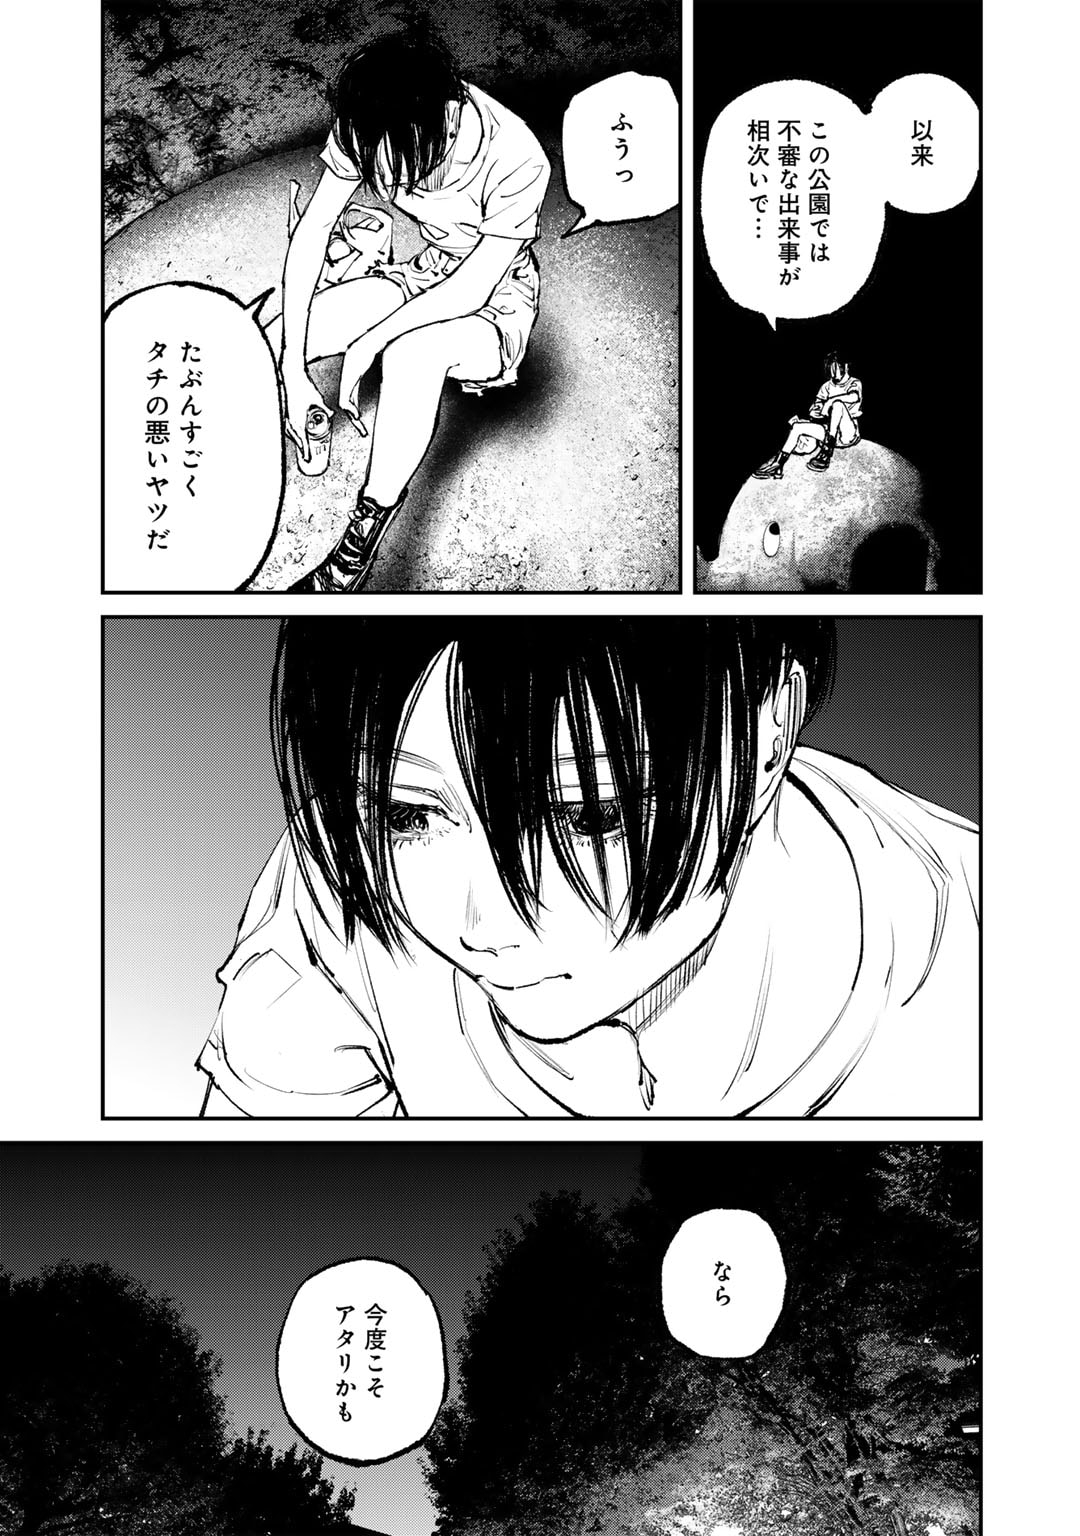 Kanata Is Into More Darker - Chapter 2 - Page 7